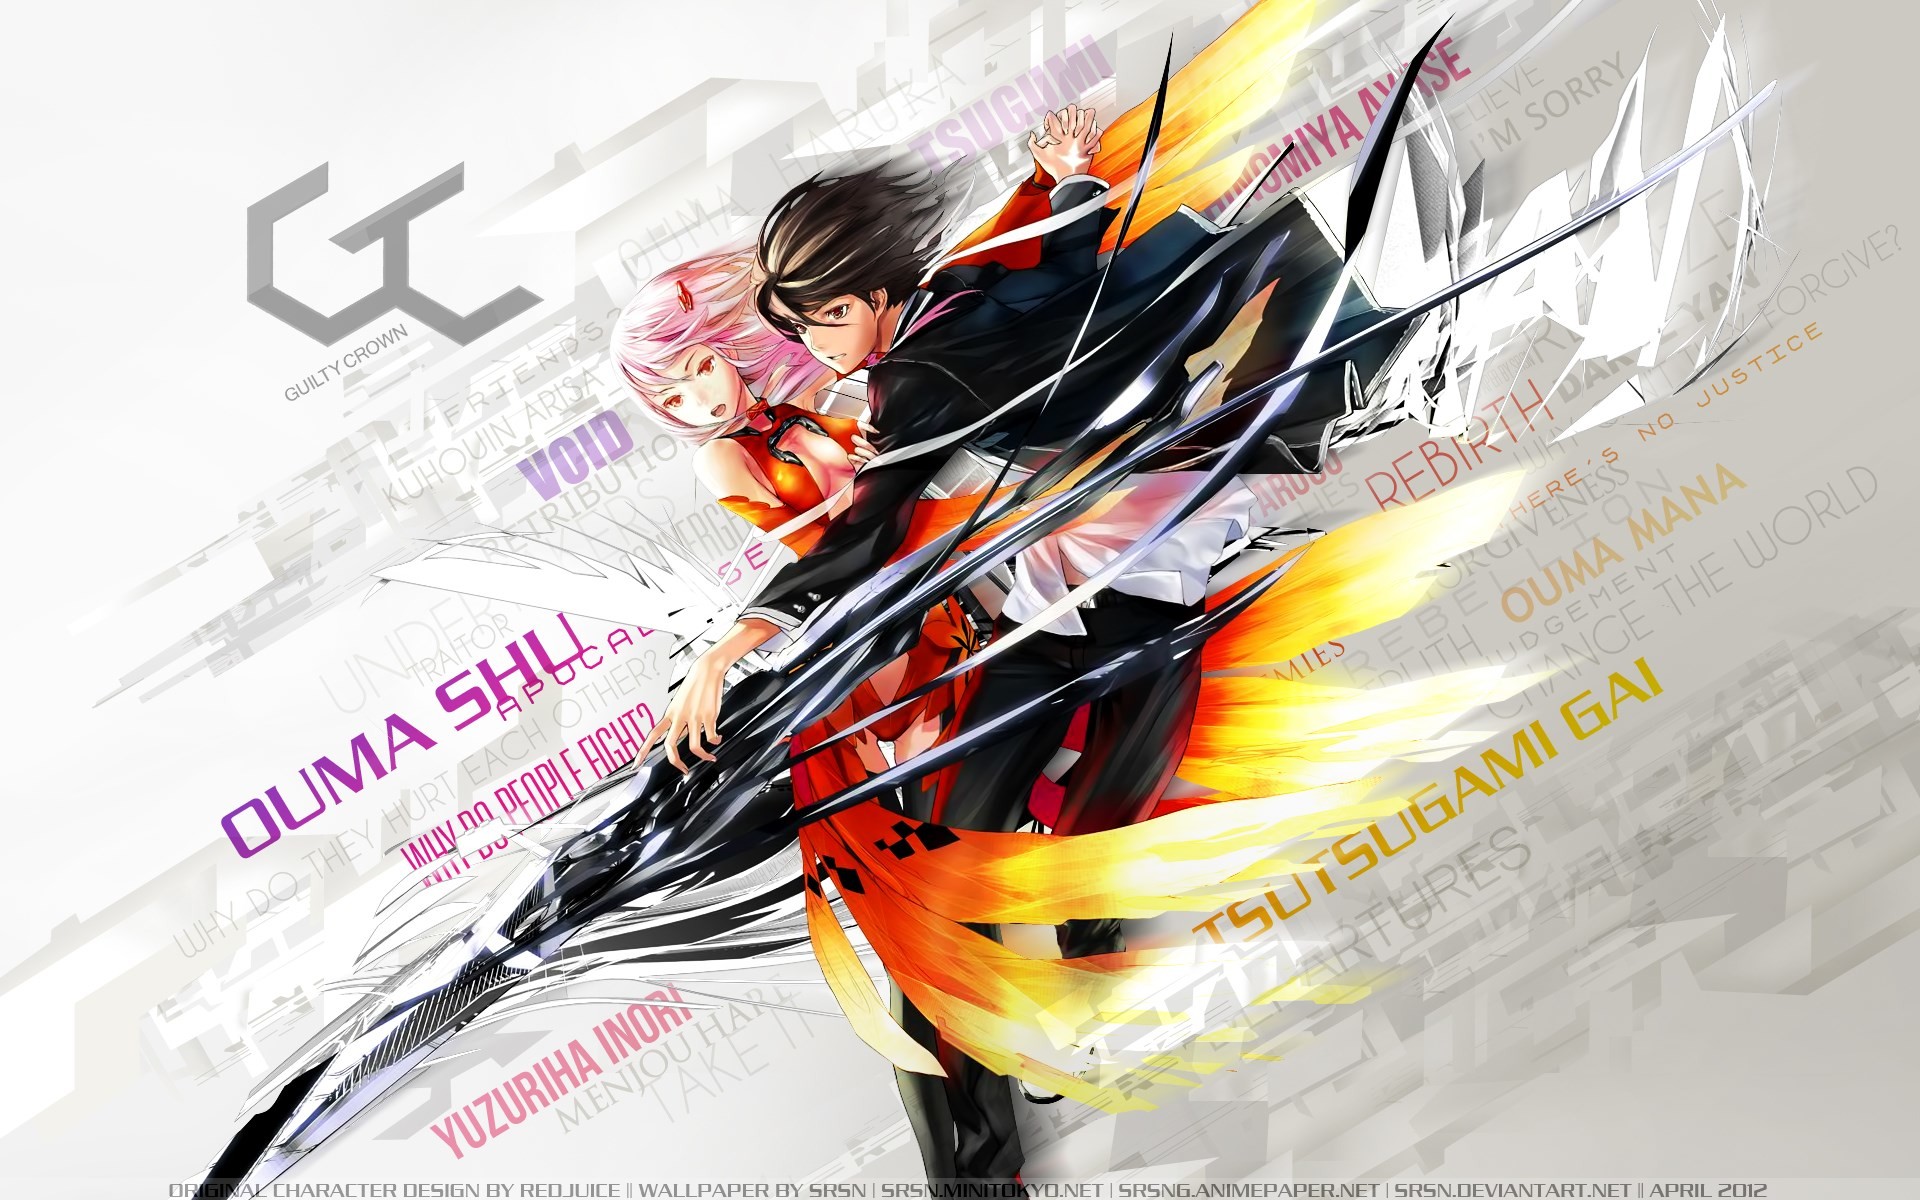 1920x1200 guilty crown backround - Full HD Wallpapers, Photos by Gaige Kingsman  (2017-03